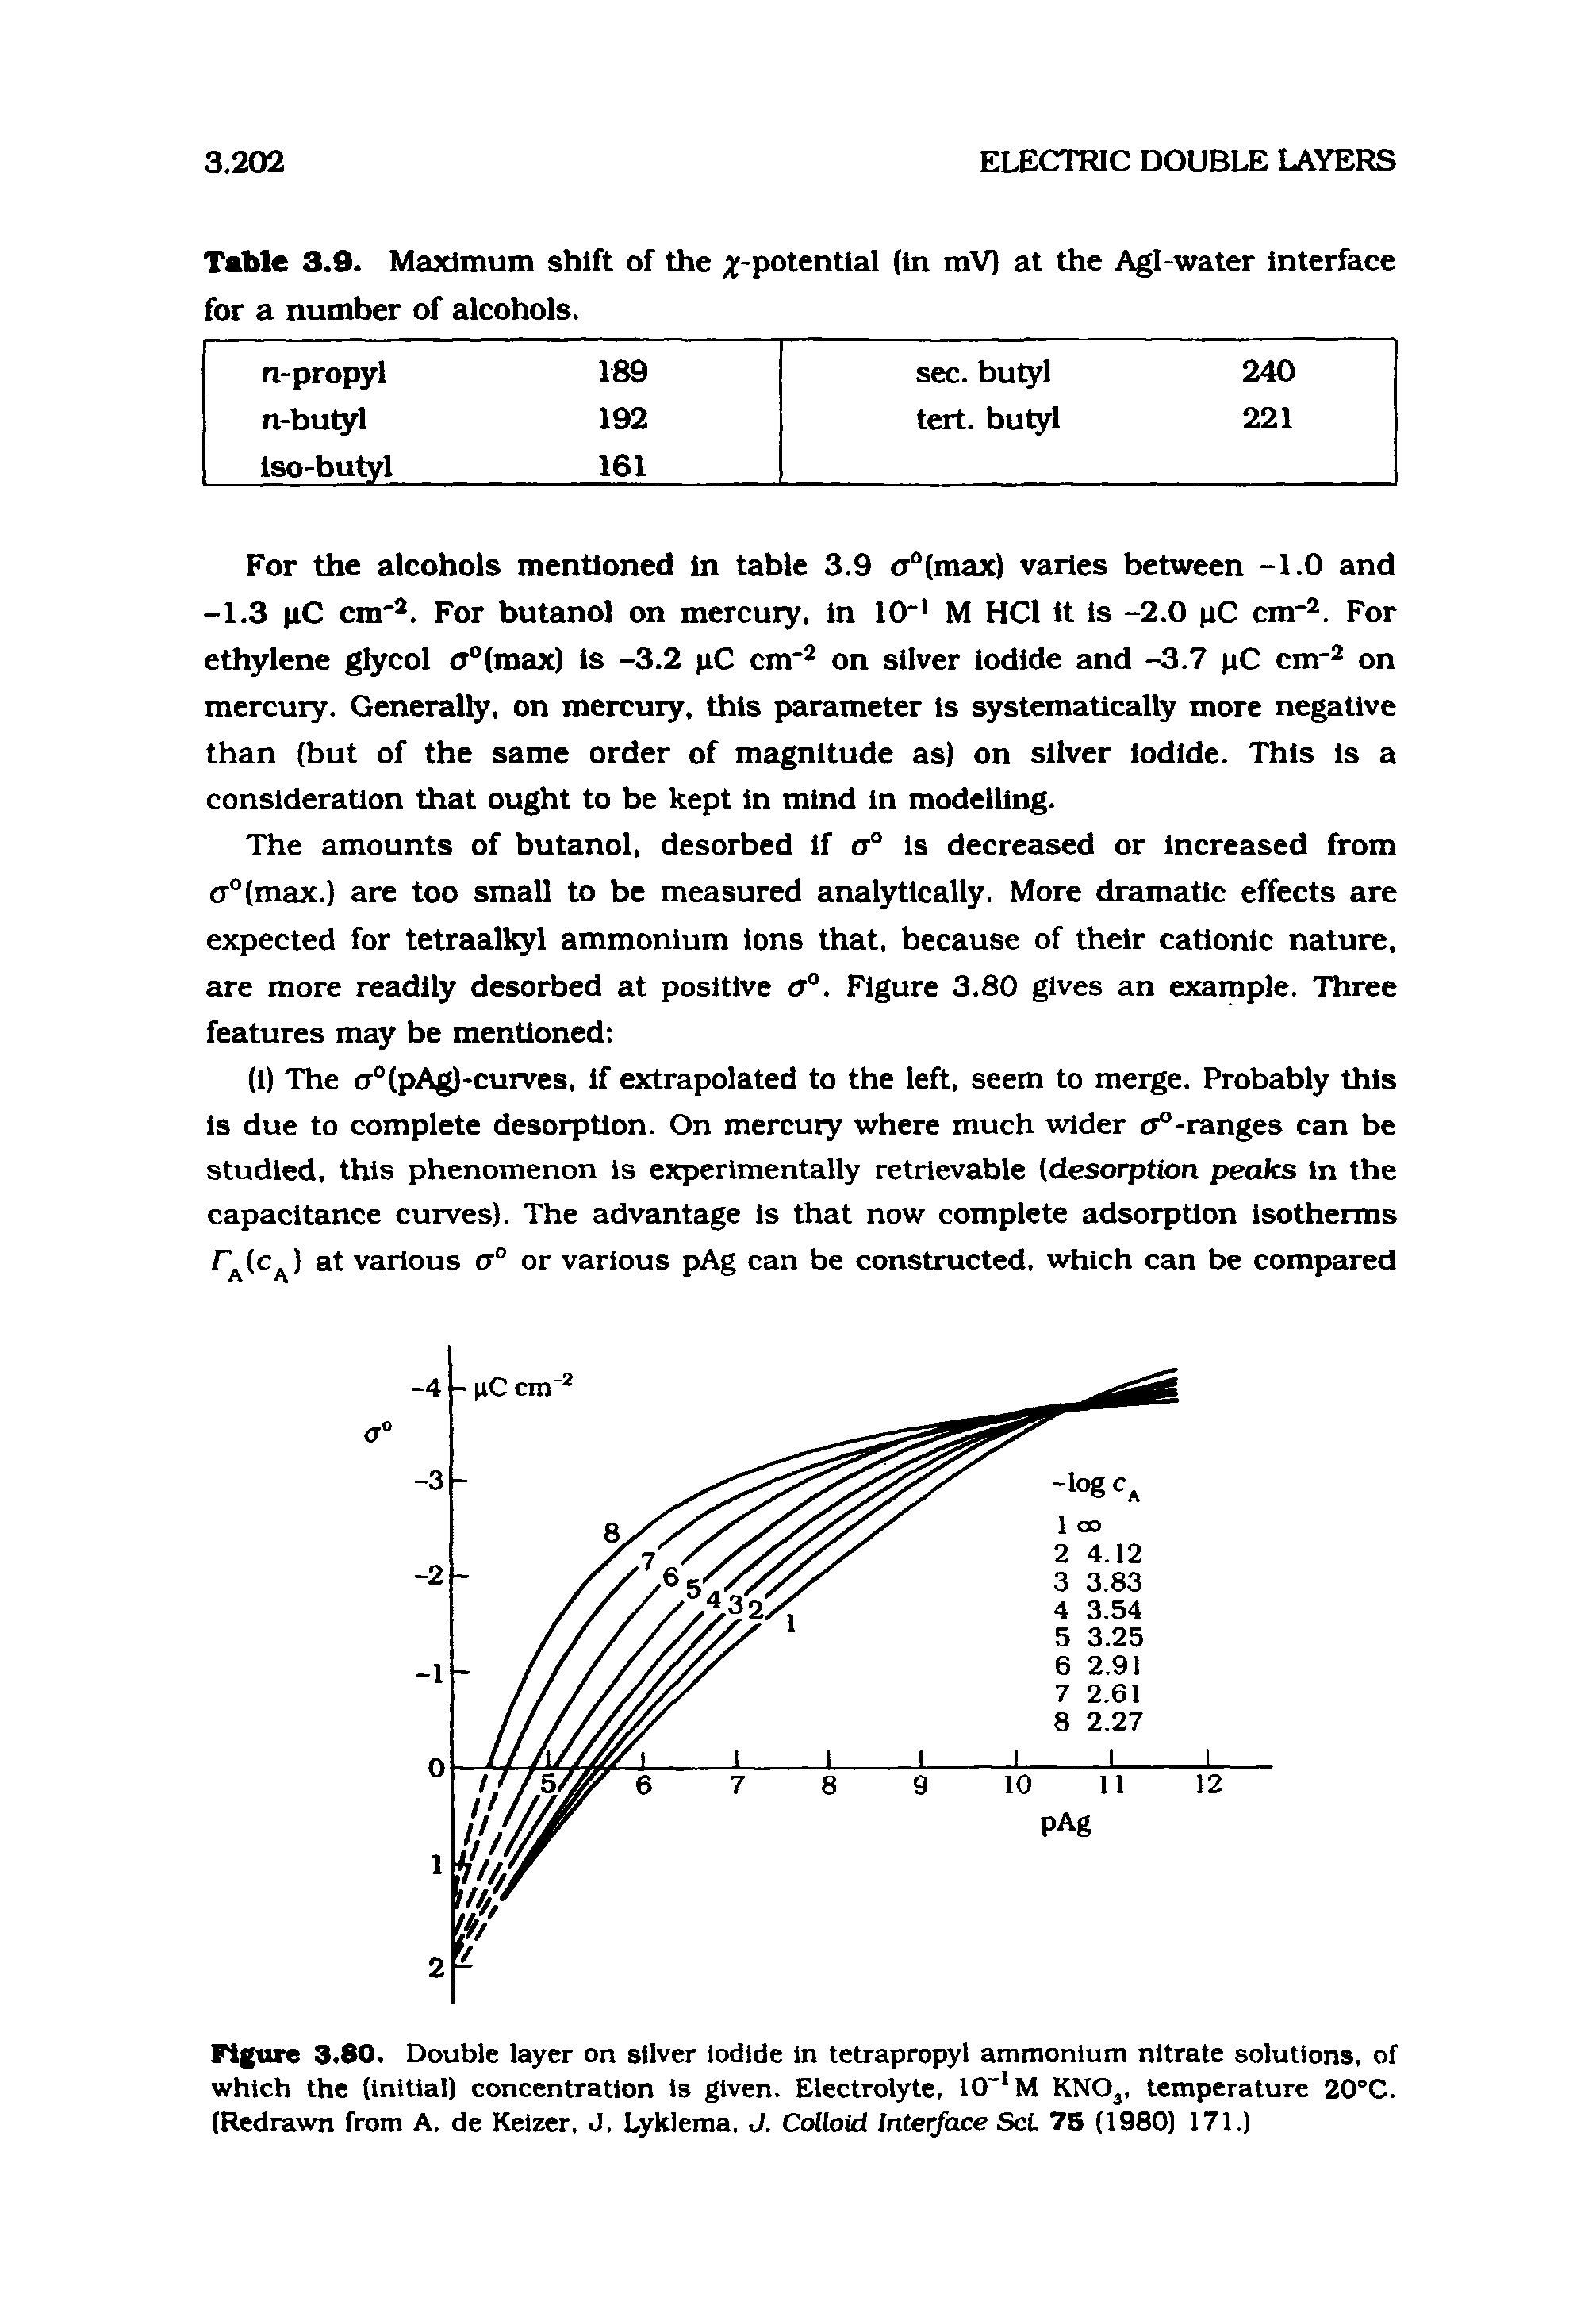 Figure 3.80. Double layer on silver iodide in tetrapropyl ammonium nitrate solutions, of which the (initial) concentration is given. Electrolyte, 10 M KNO, temperature 20 C. (Redrawn from A. de Keizer, J. Lyklema. J. Colloid Interface Set 75 (1980) 171.)...